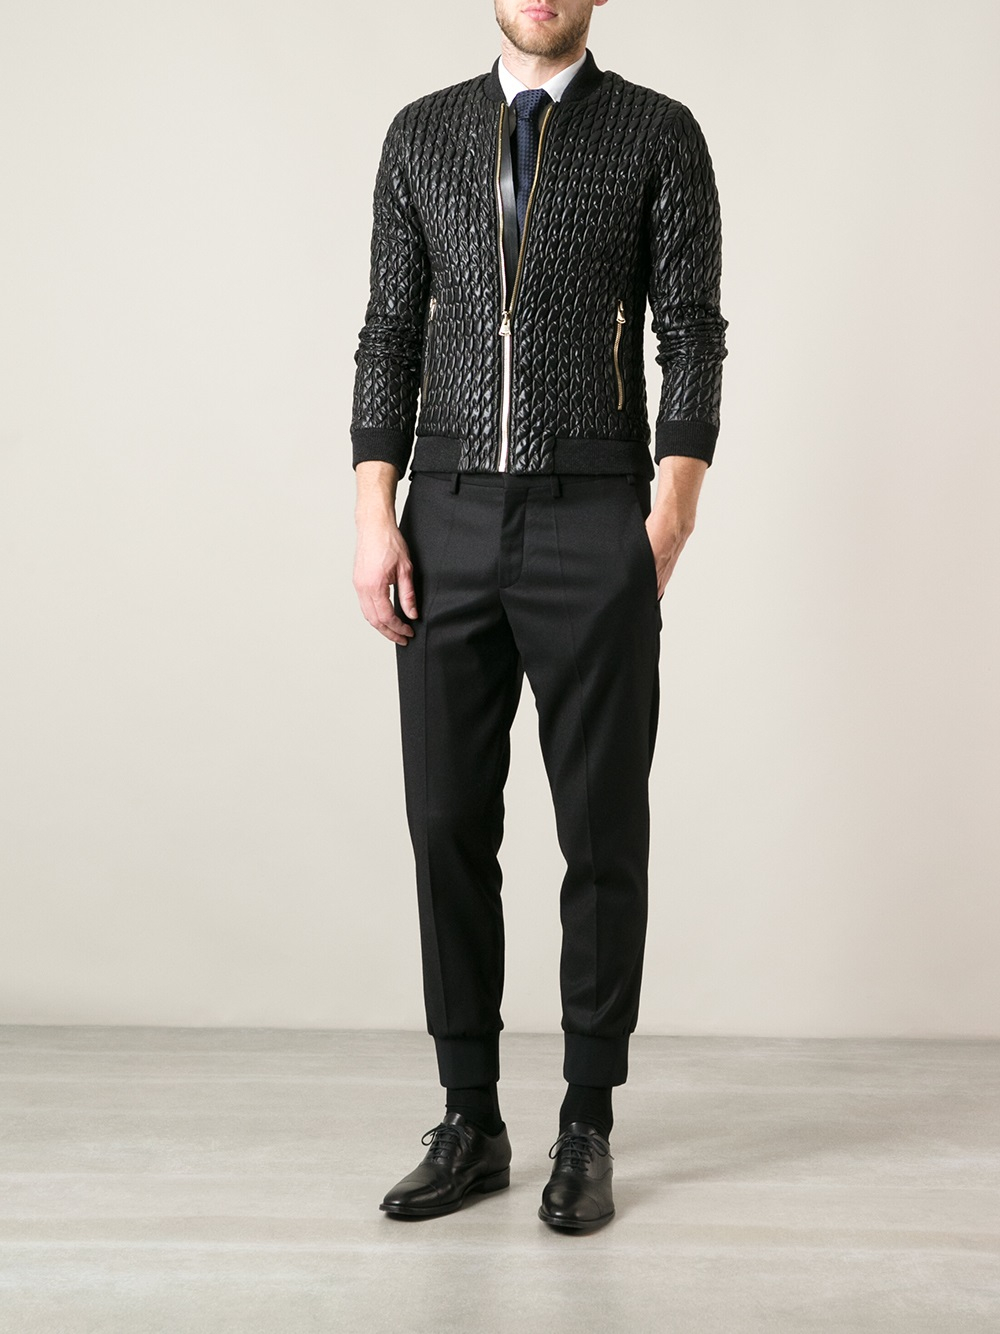 Dolce & Gabbana Quilted Jacket in Black for Men - Lyst